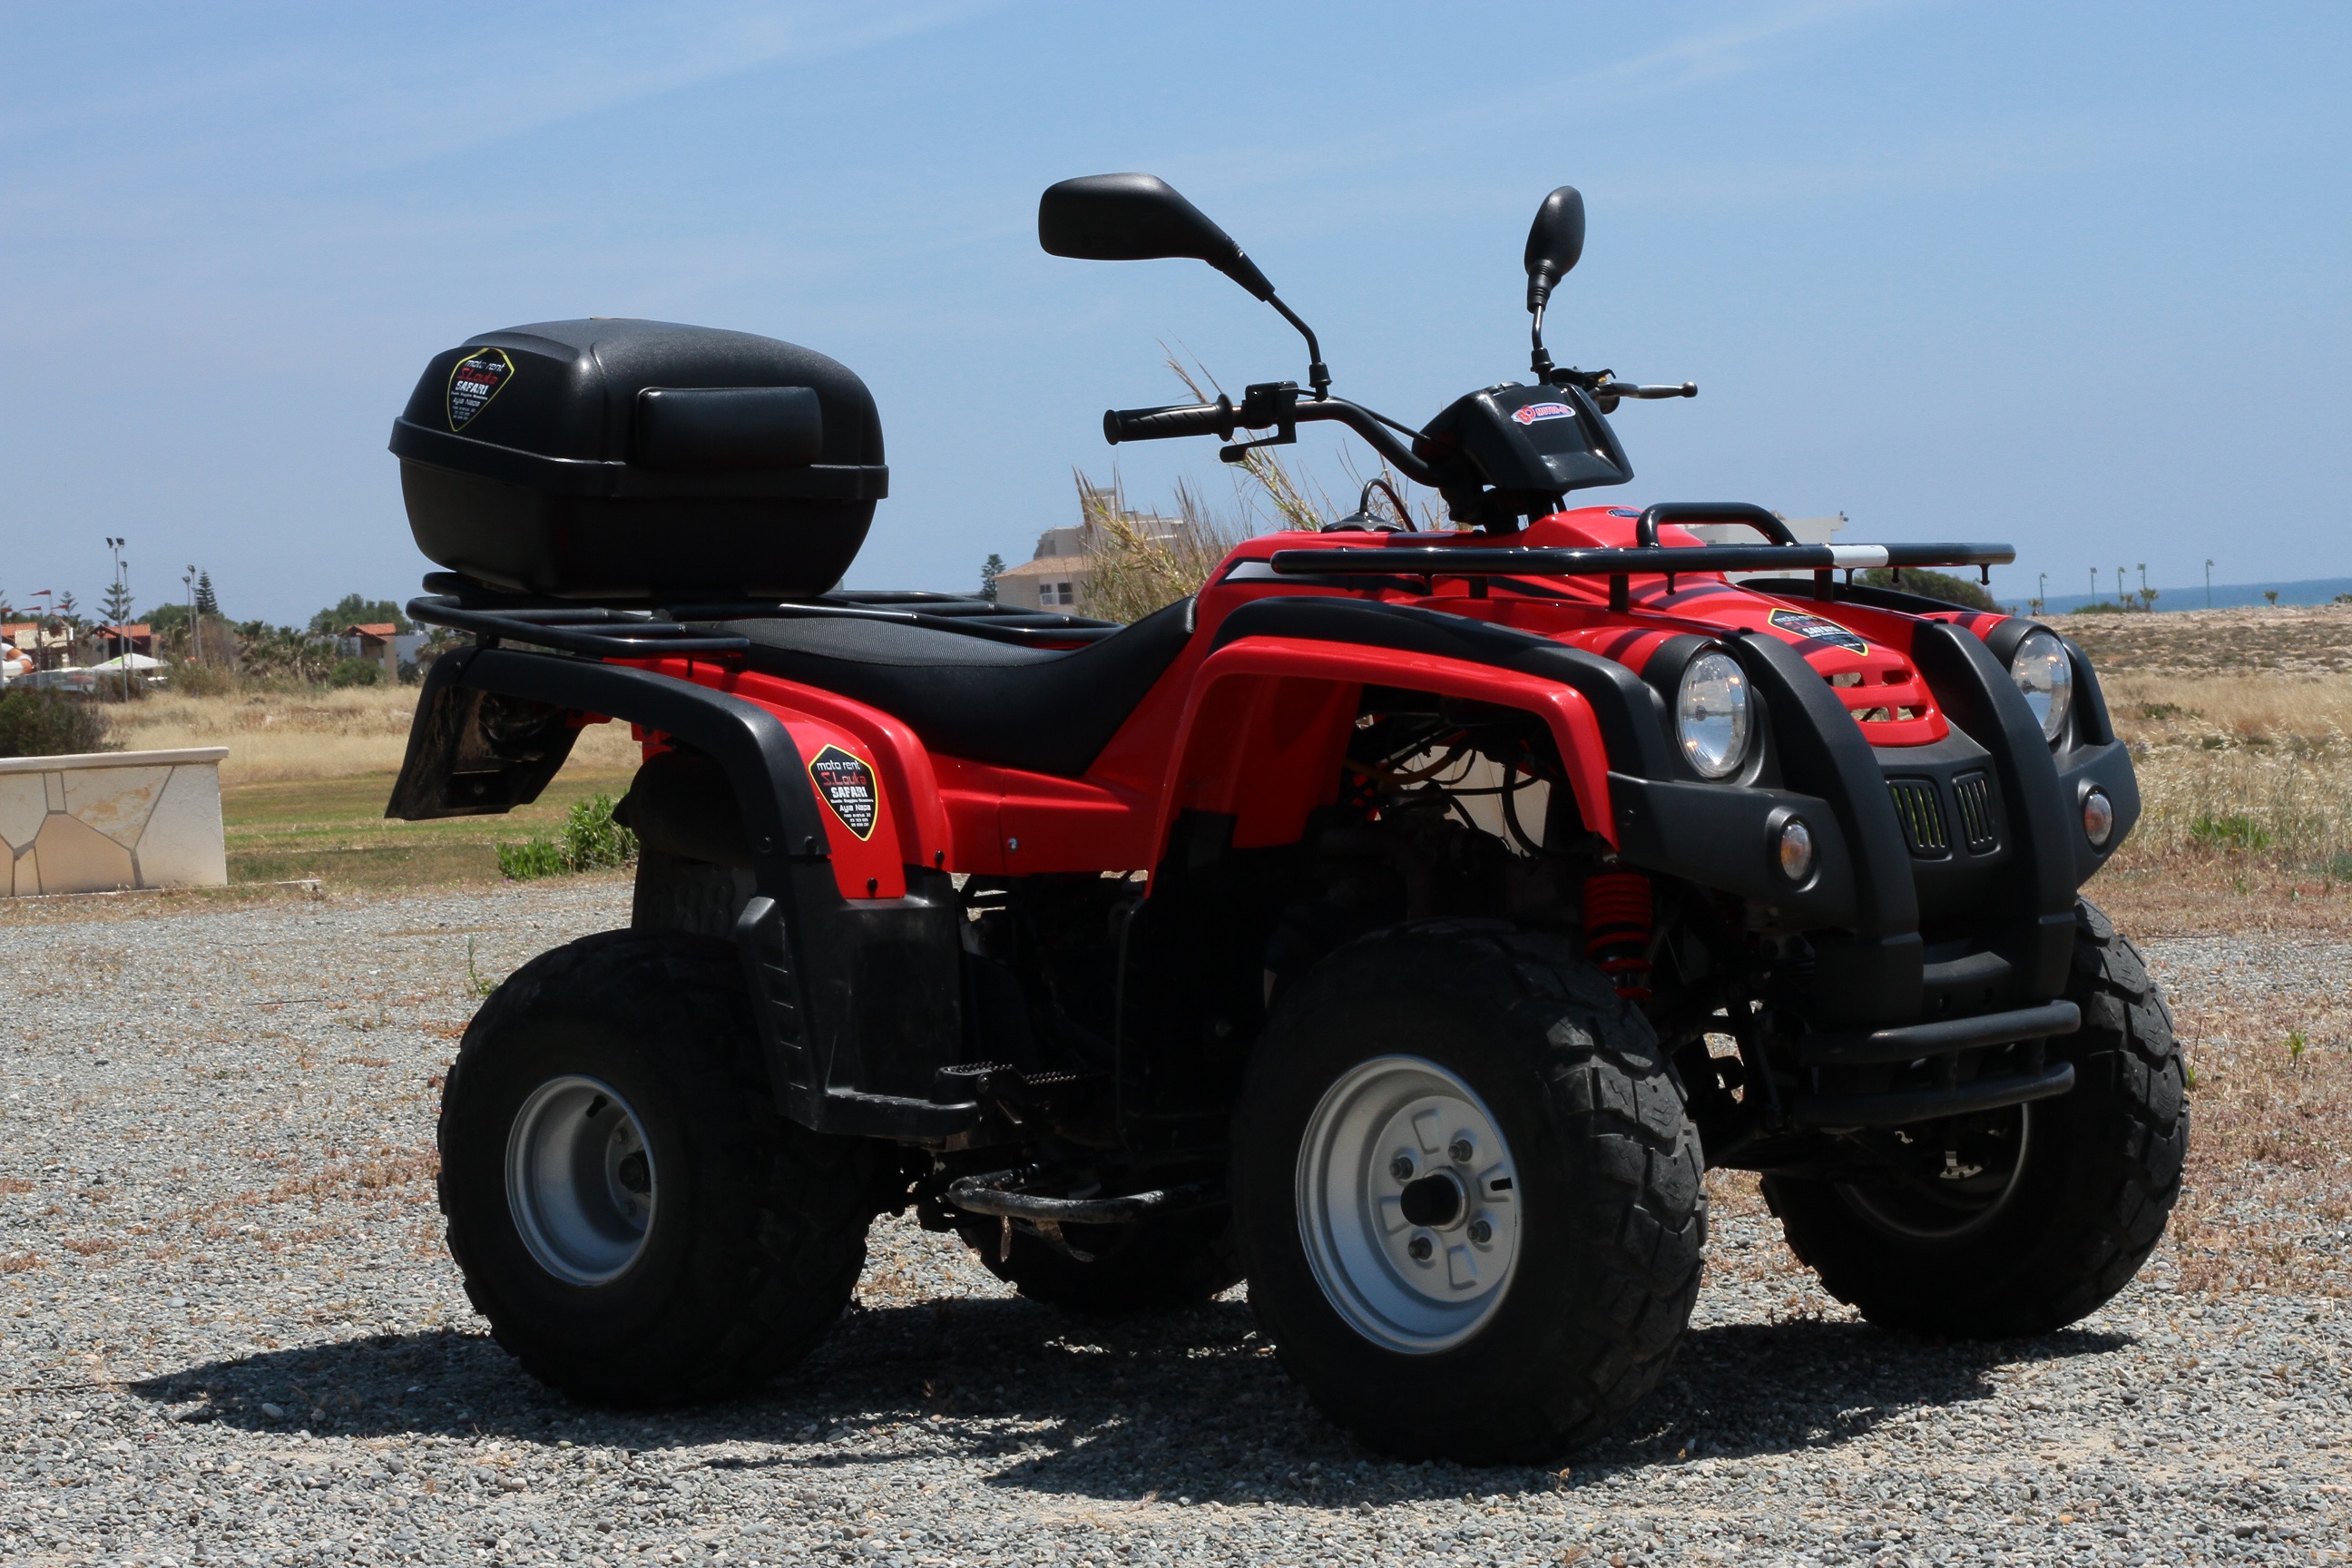 Adly Quad 200cc in red - side view